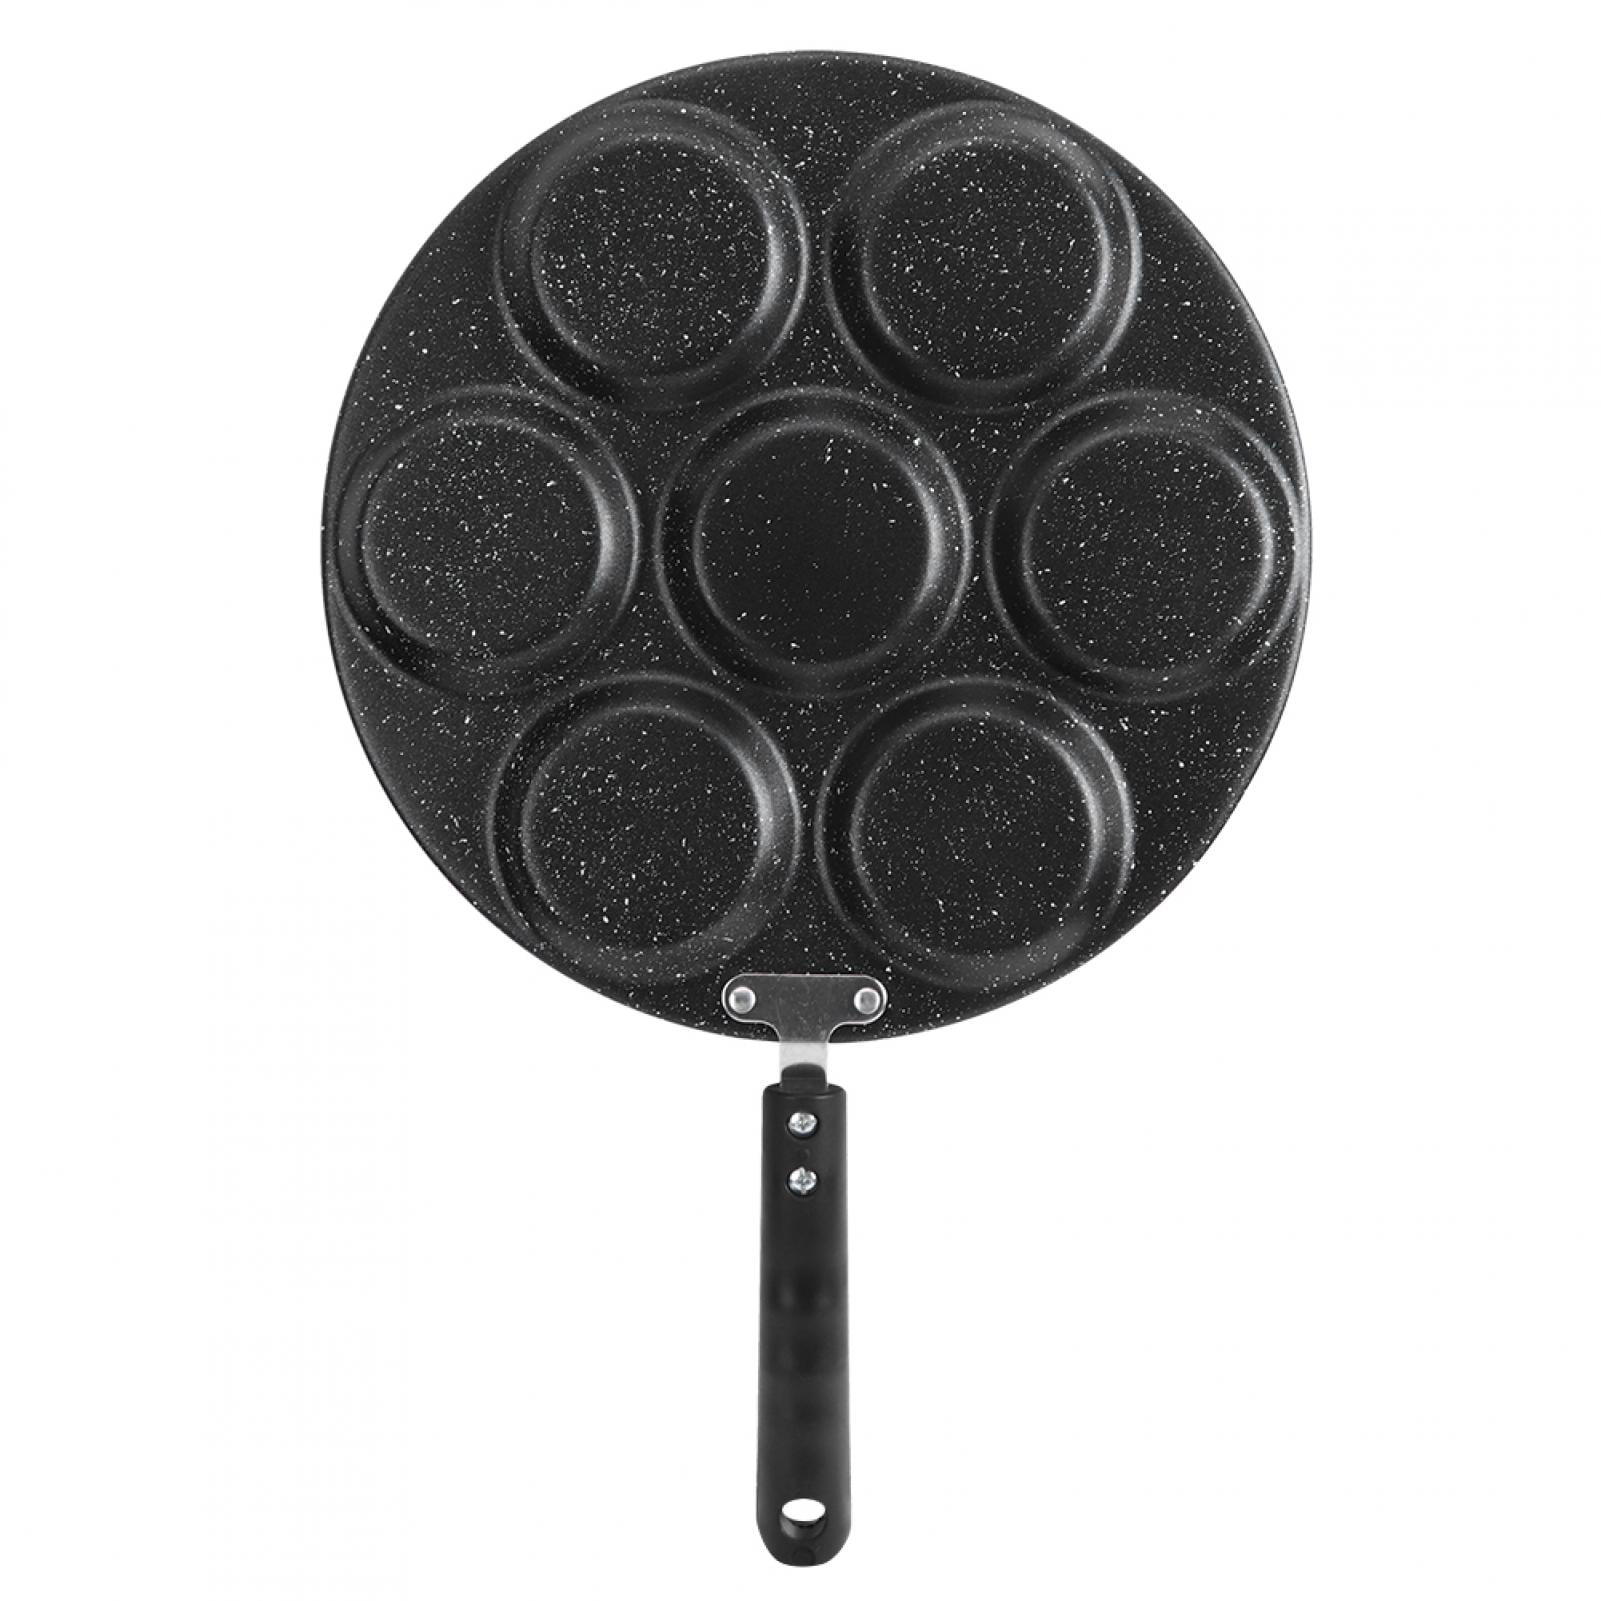 Sakuchi Nonstick Frying Pan Set with Lids, Skillets Egg Omelette Pancakes  Pans 6-Piece, 8 inch / 9.5 inch / 11 inch Pan Set for Sale in Monterey  Park, CA - OfferUp